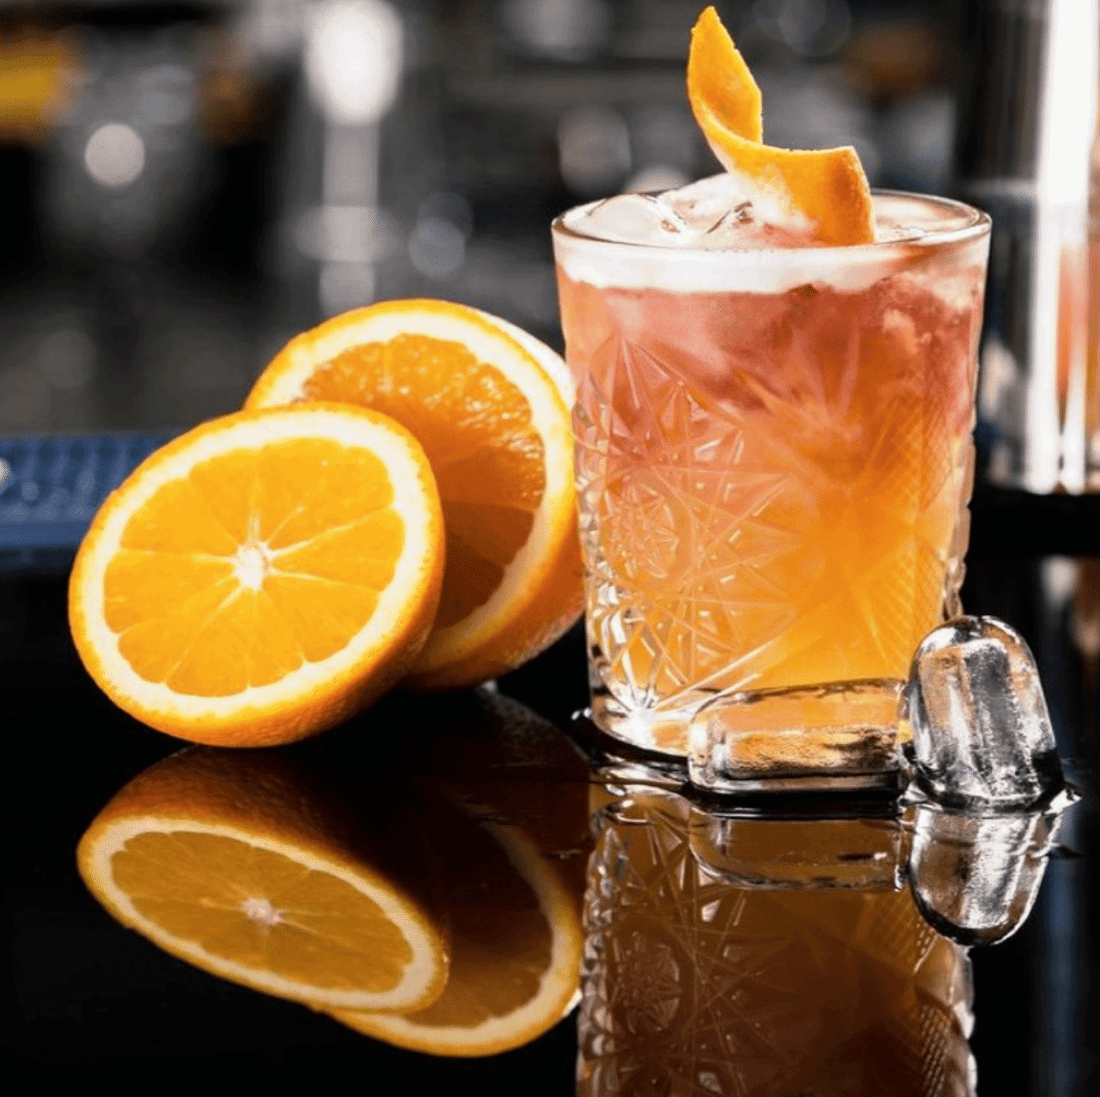 Pomegranate Orange cocktail, garnished with an orange twist. Cocktail features a colour change from orange to red